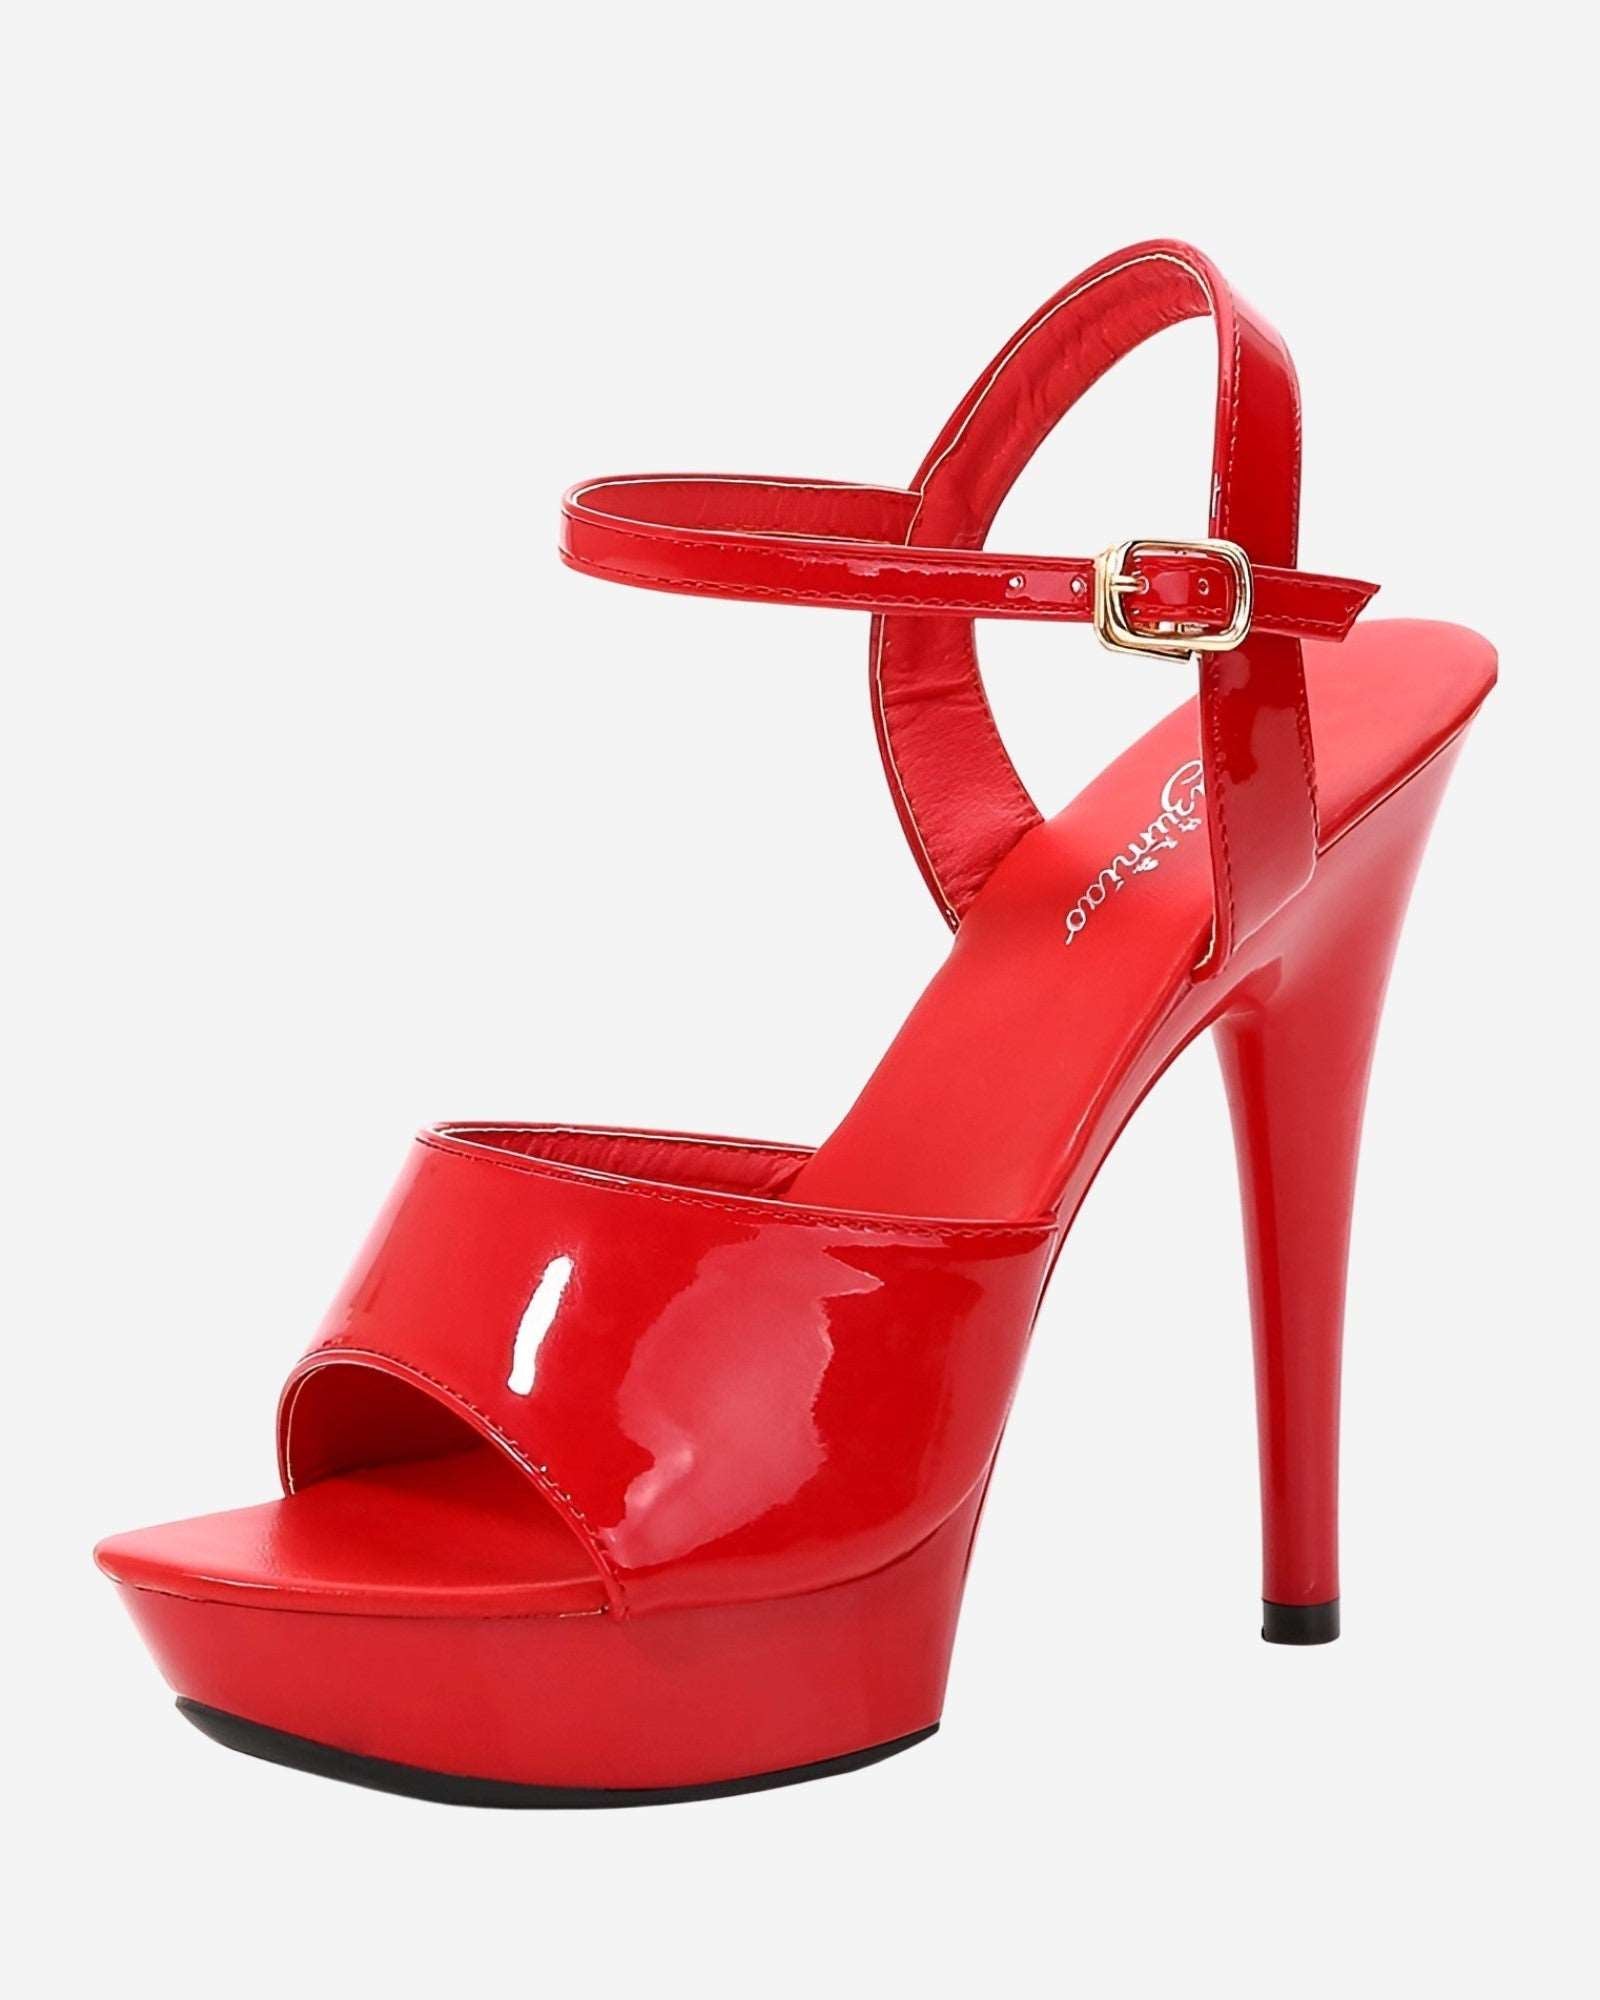 Shoes Red Classic Pole Dance High Heels